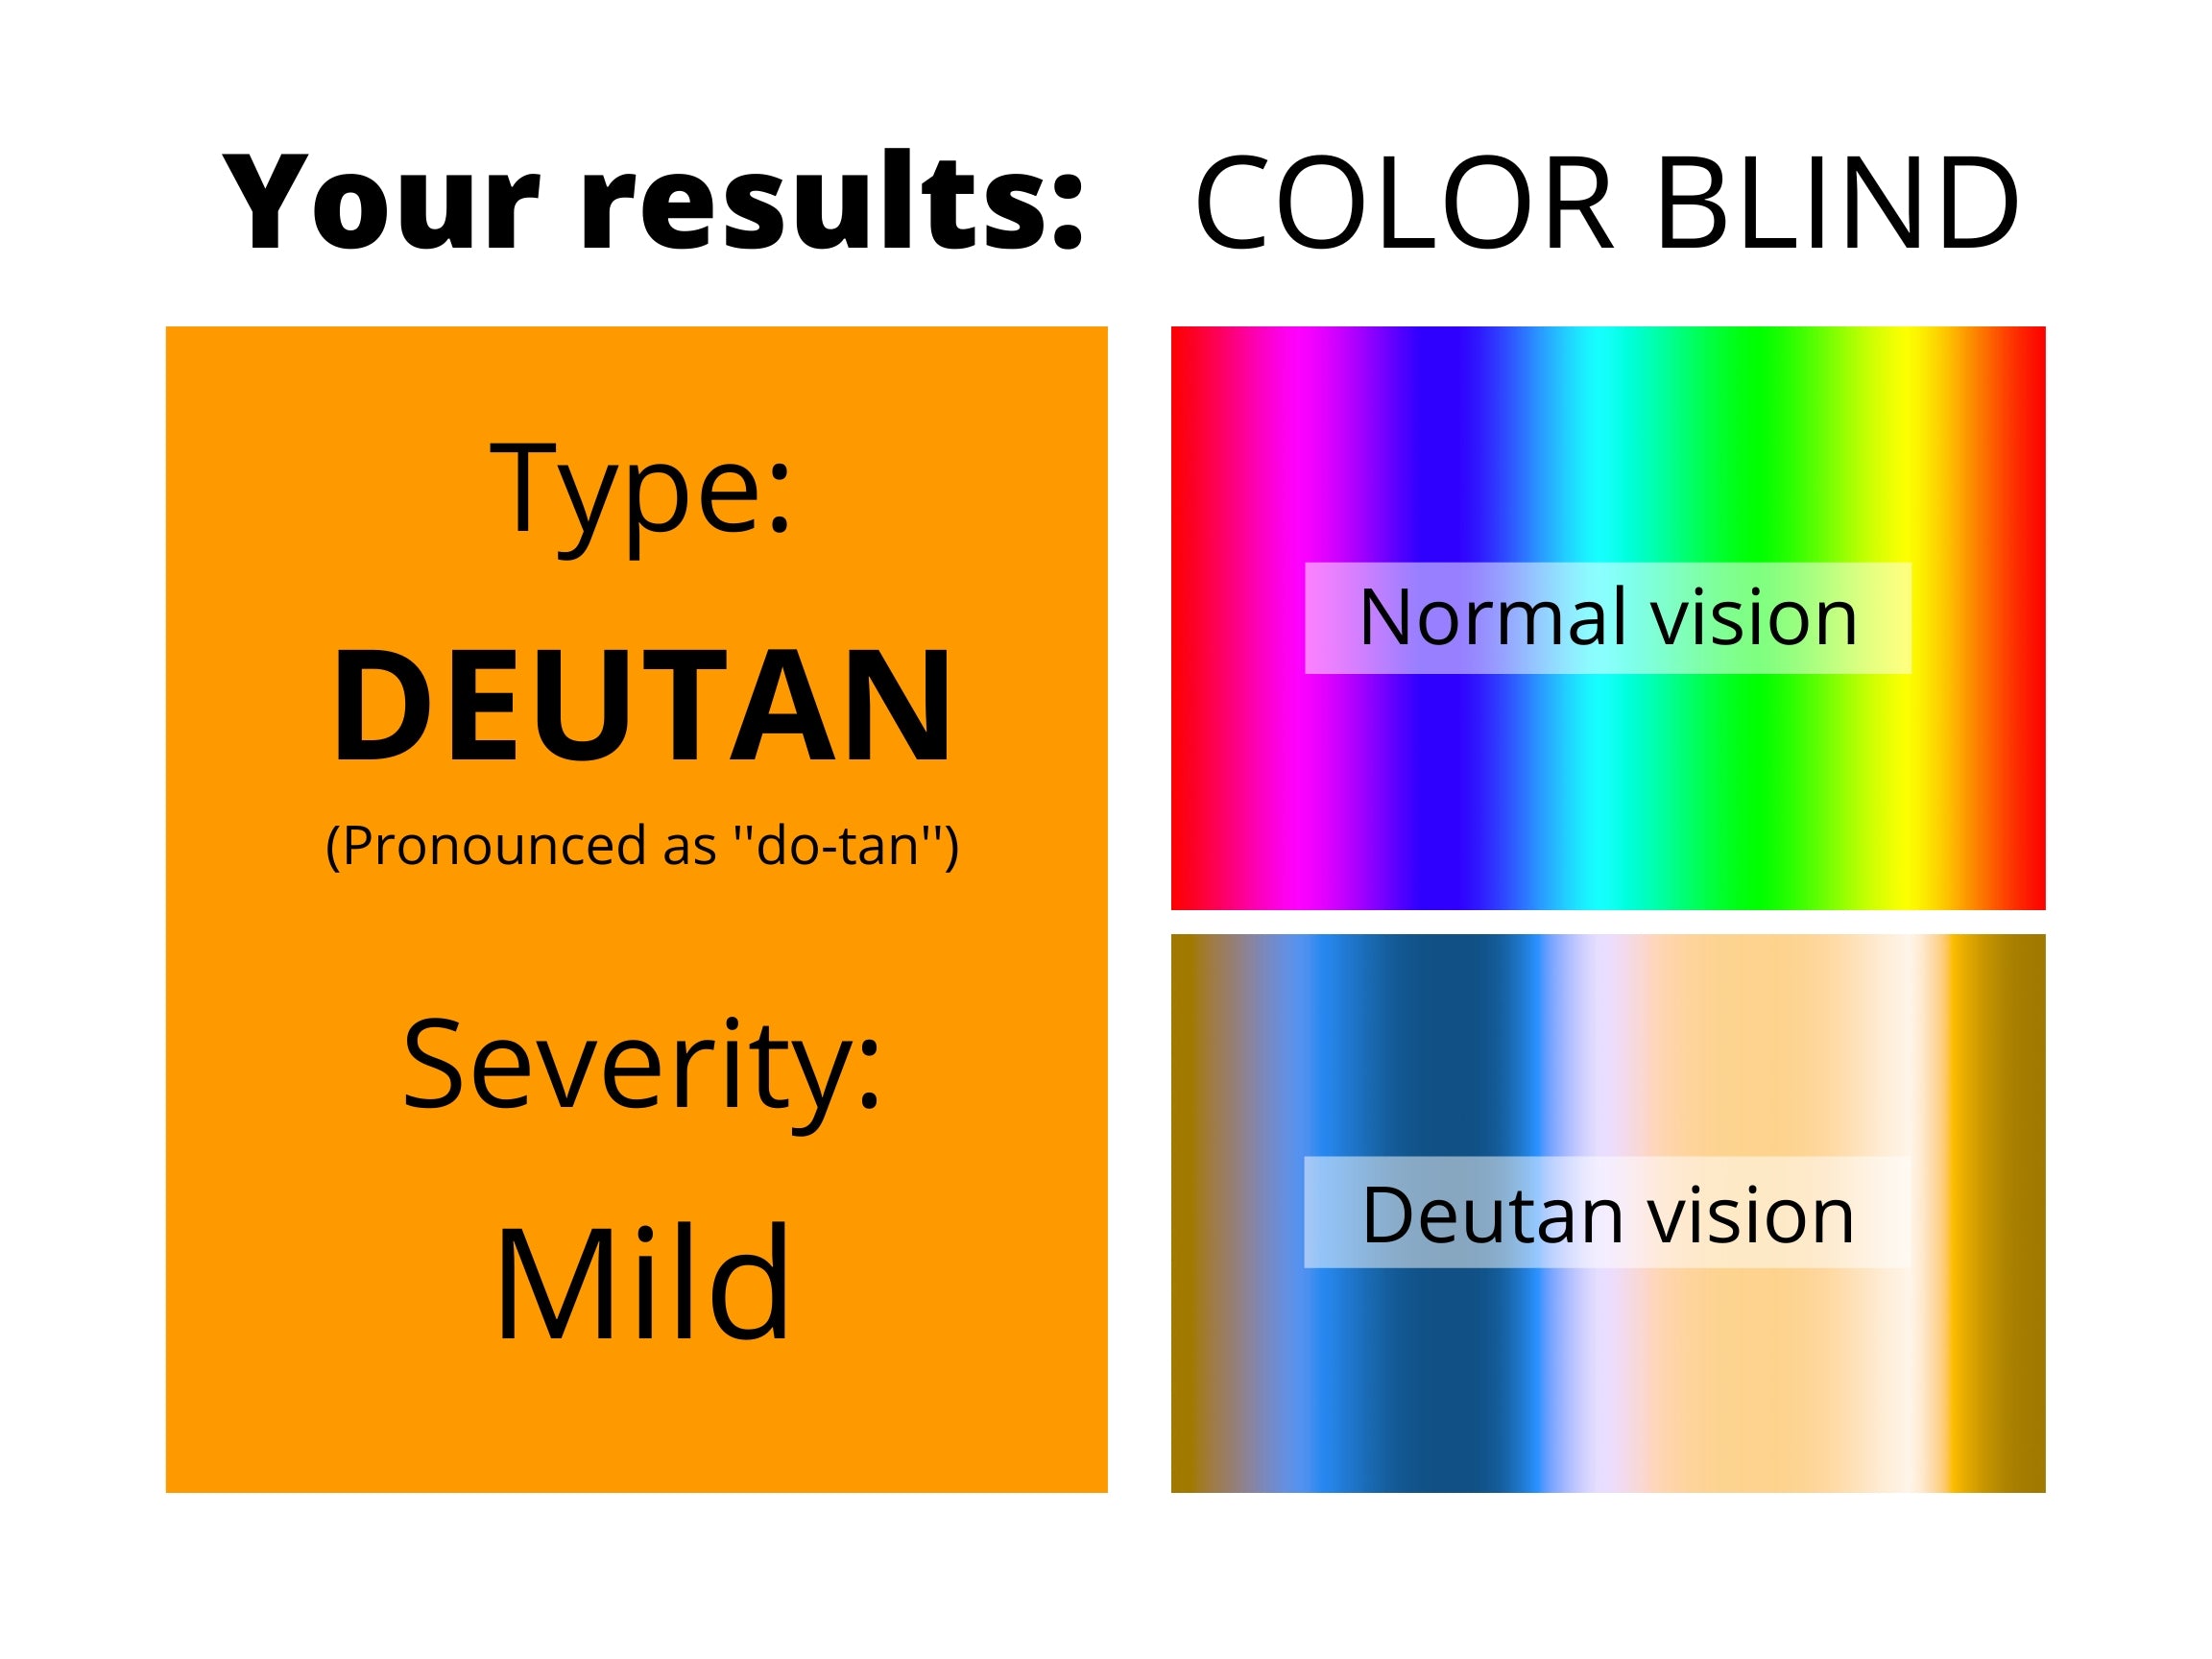 Is it possible to be slightly colorblind?